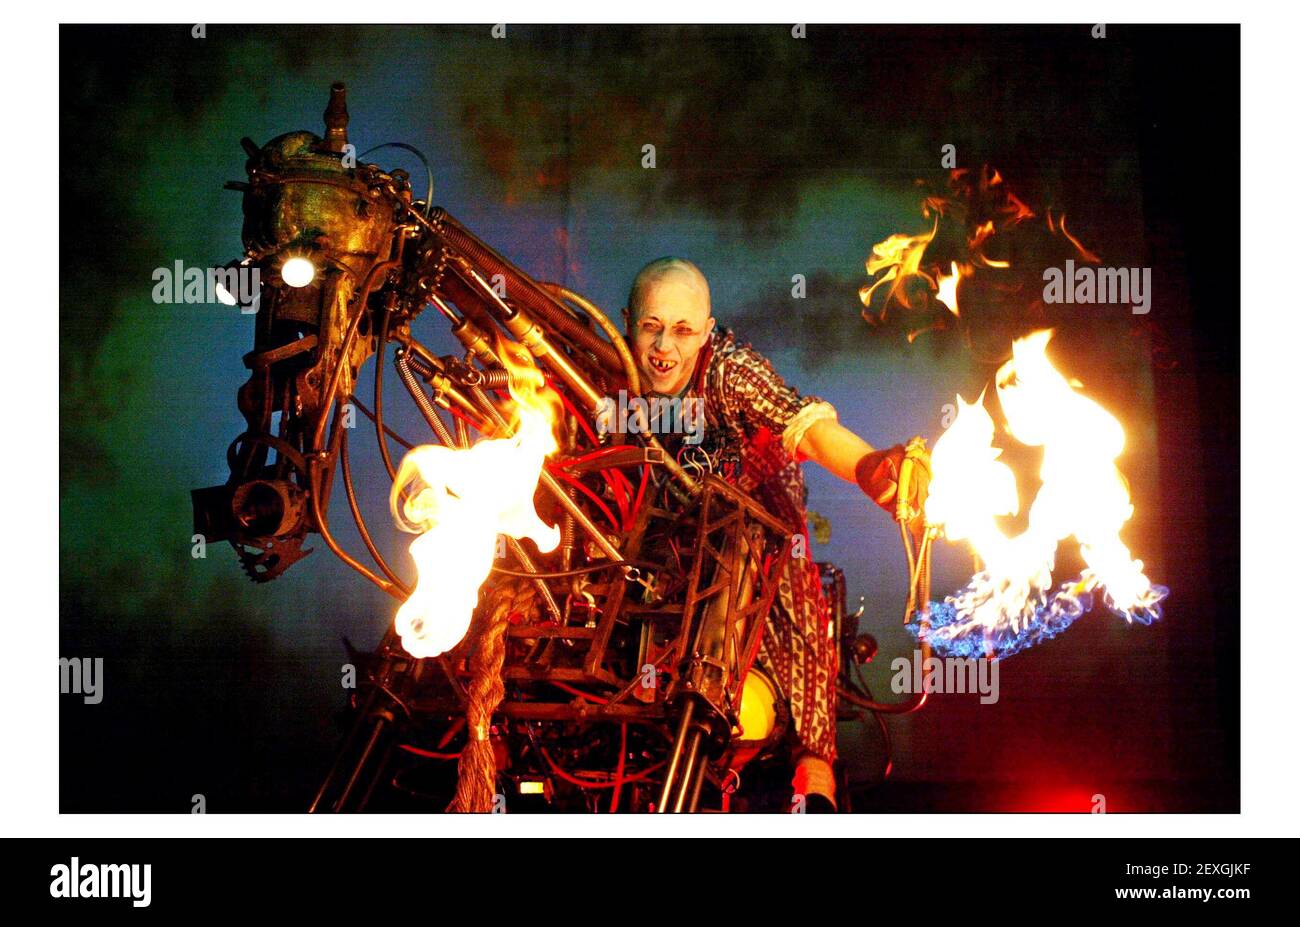 In association with art of regeneration, London international mime festival, forget me not  a spectacular new show from Paka and his life size mechanical steed, on at the Albany theatre Depford Thurs 15 - fri 30 Jan 04.pic David Sandison 14/1/2004 Stock Photo